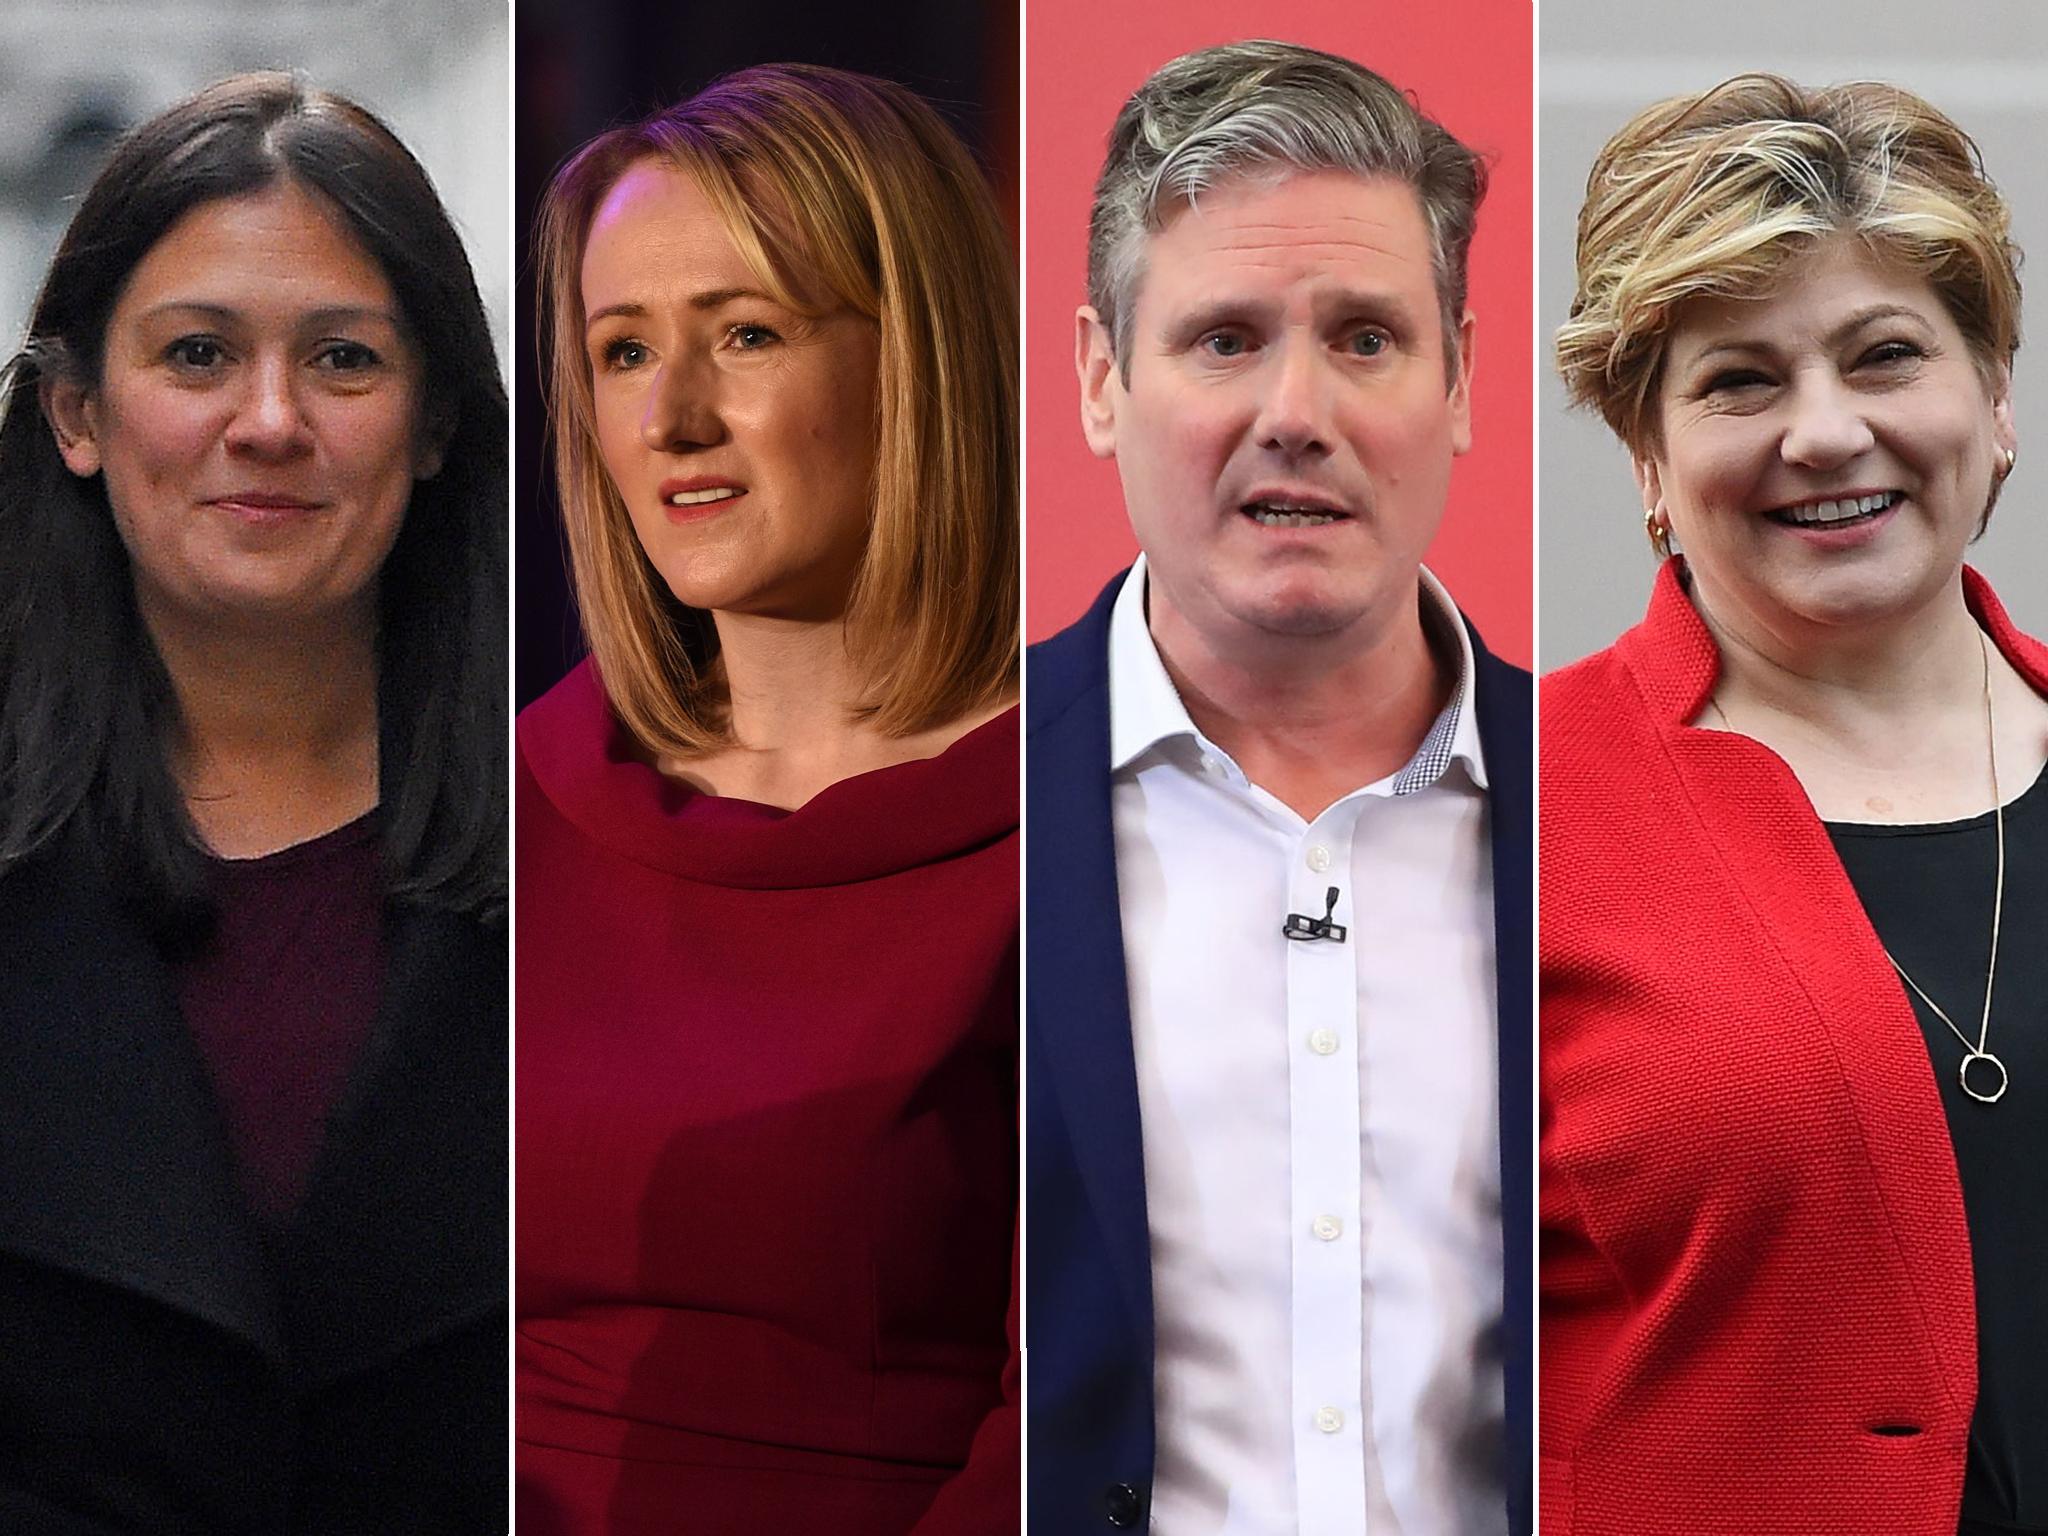 The remaining contenders to succeed Jeremy Corbyn: Lisa Nandy, Rebecca Long-Bailey, Keir Starmer, Emily Thornberry